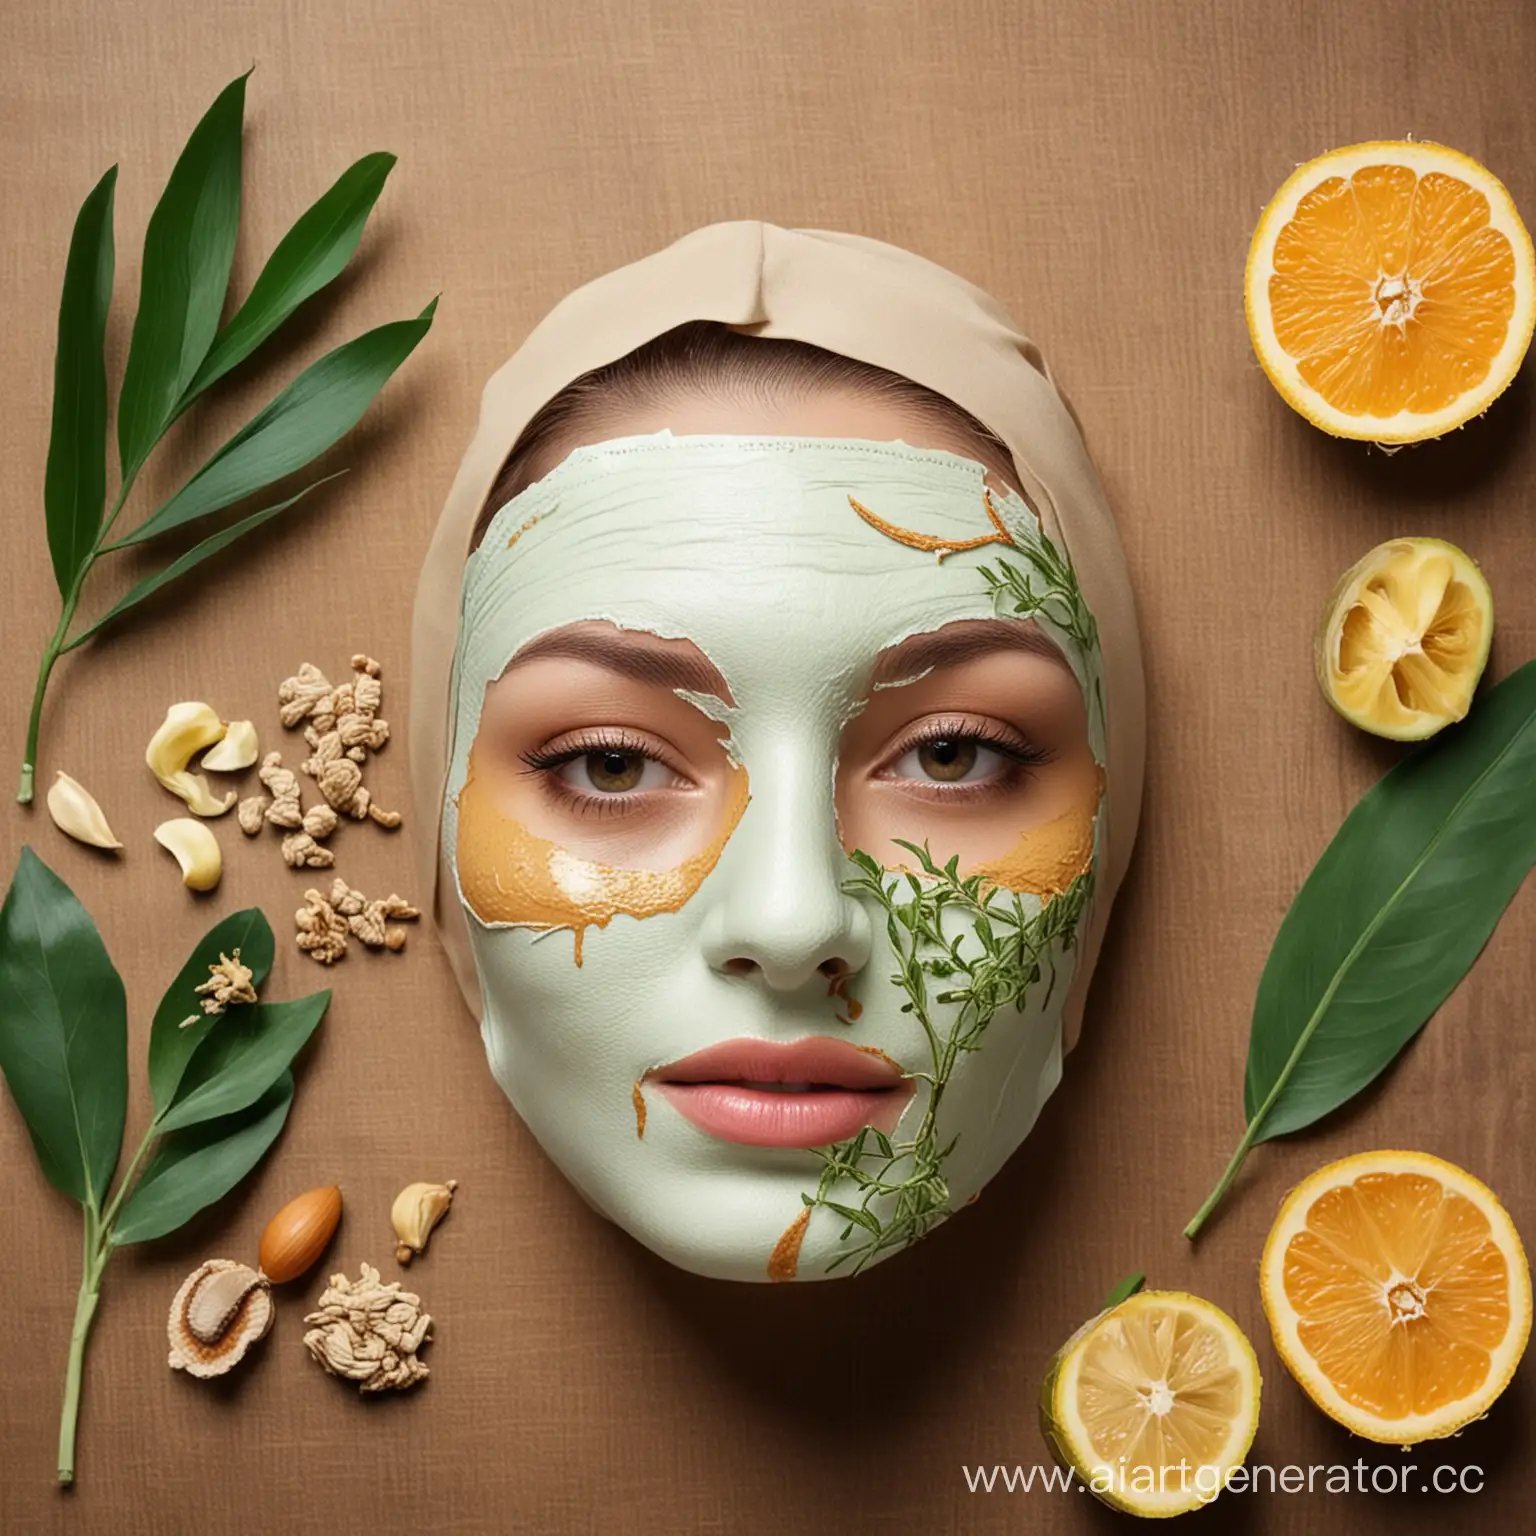 Natural-Ingredient-Skin-Care-Masks-Refreshing-and-Nourishing-Beauty-Treatments